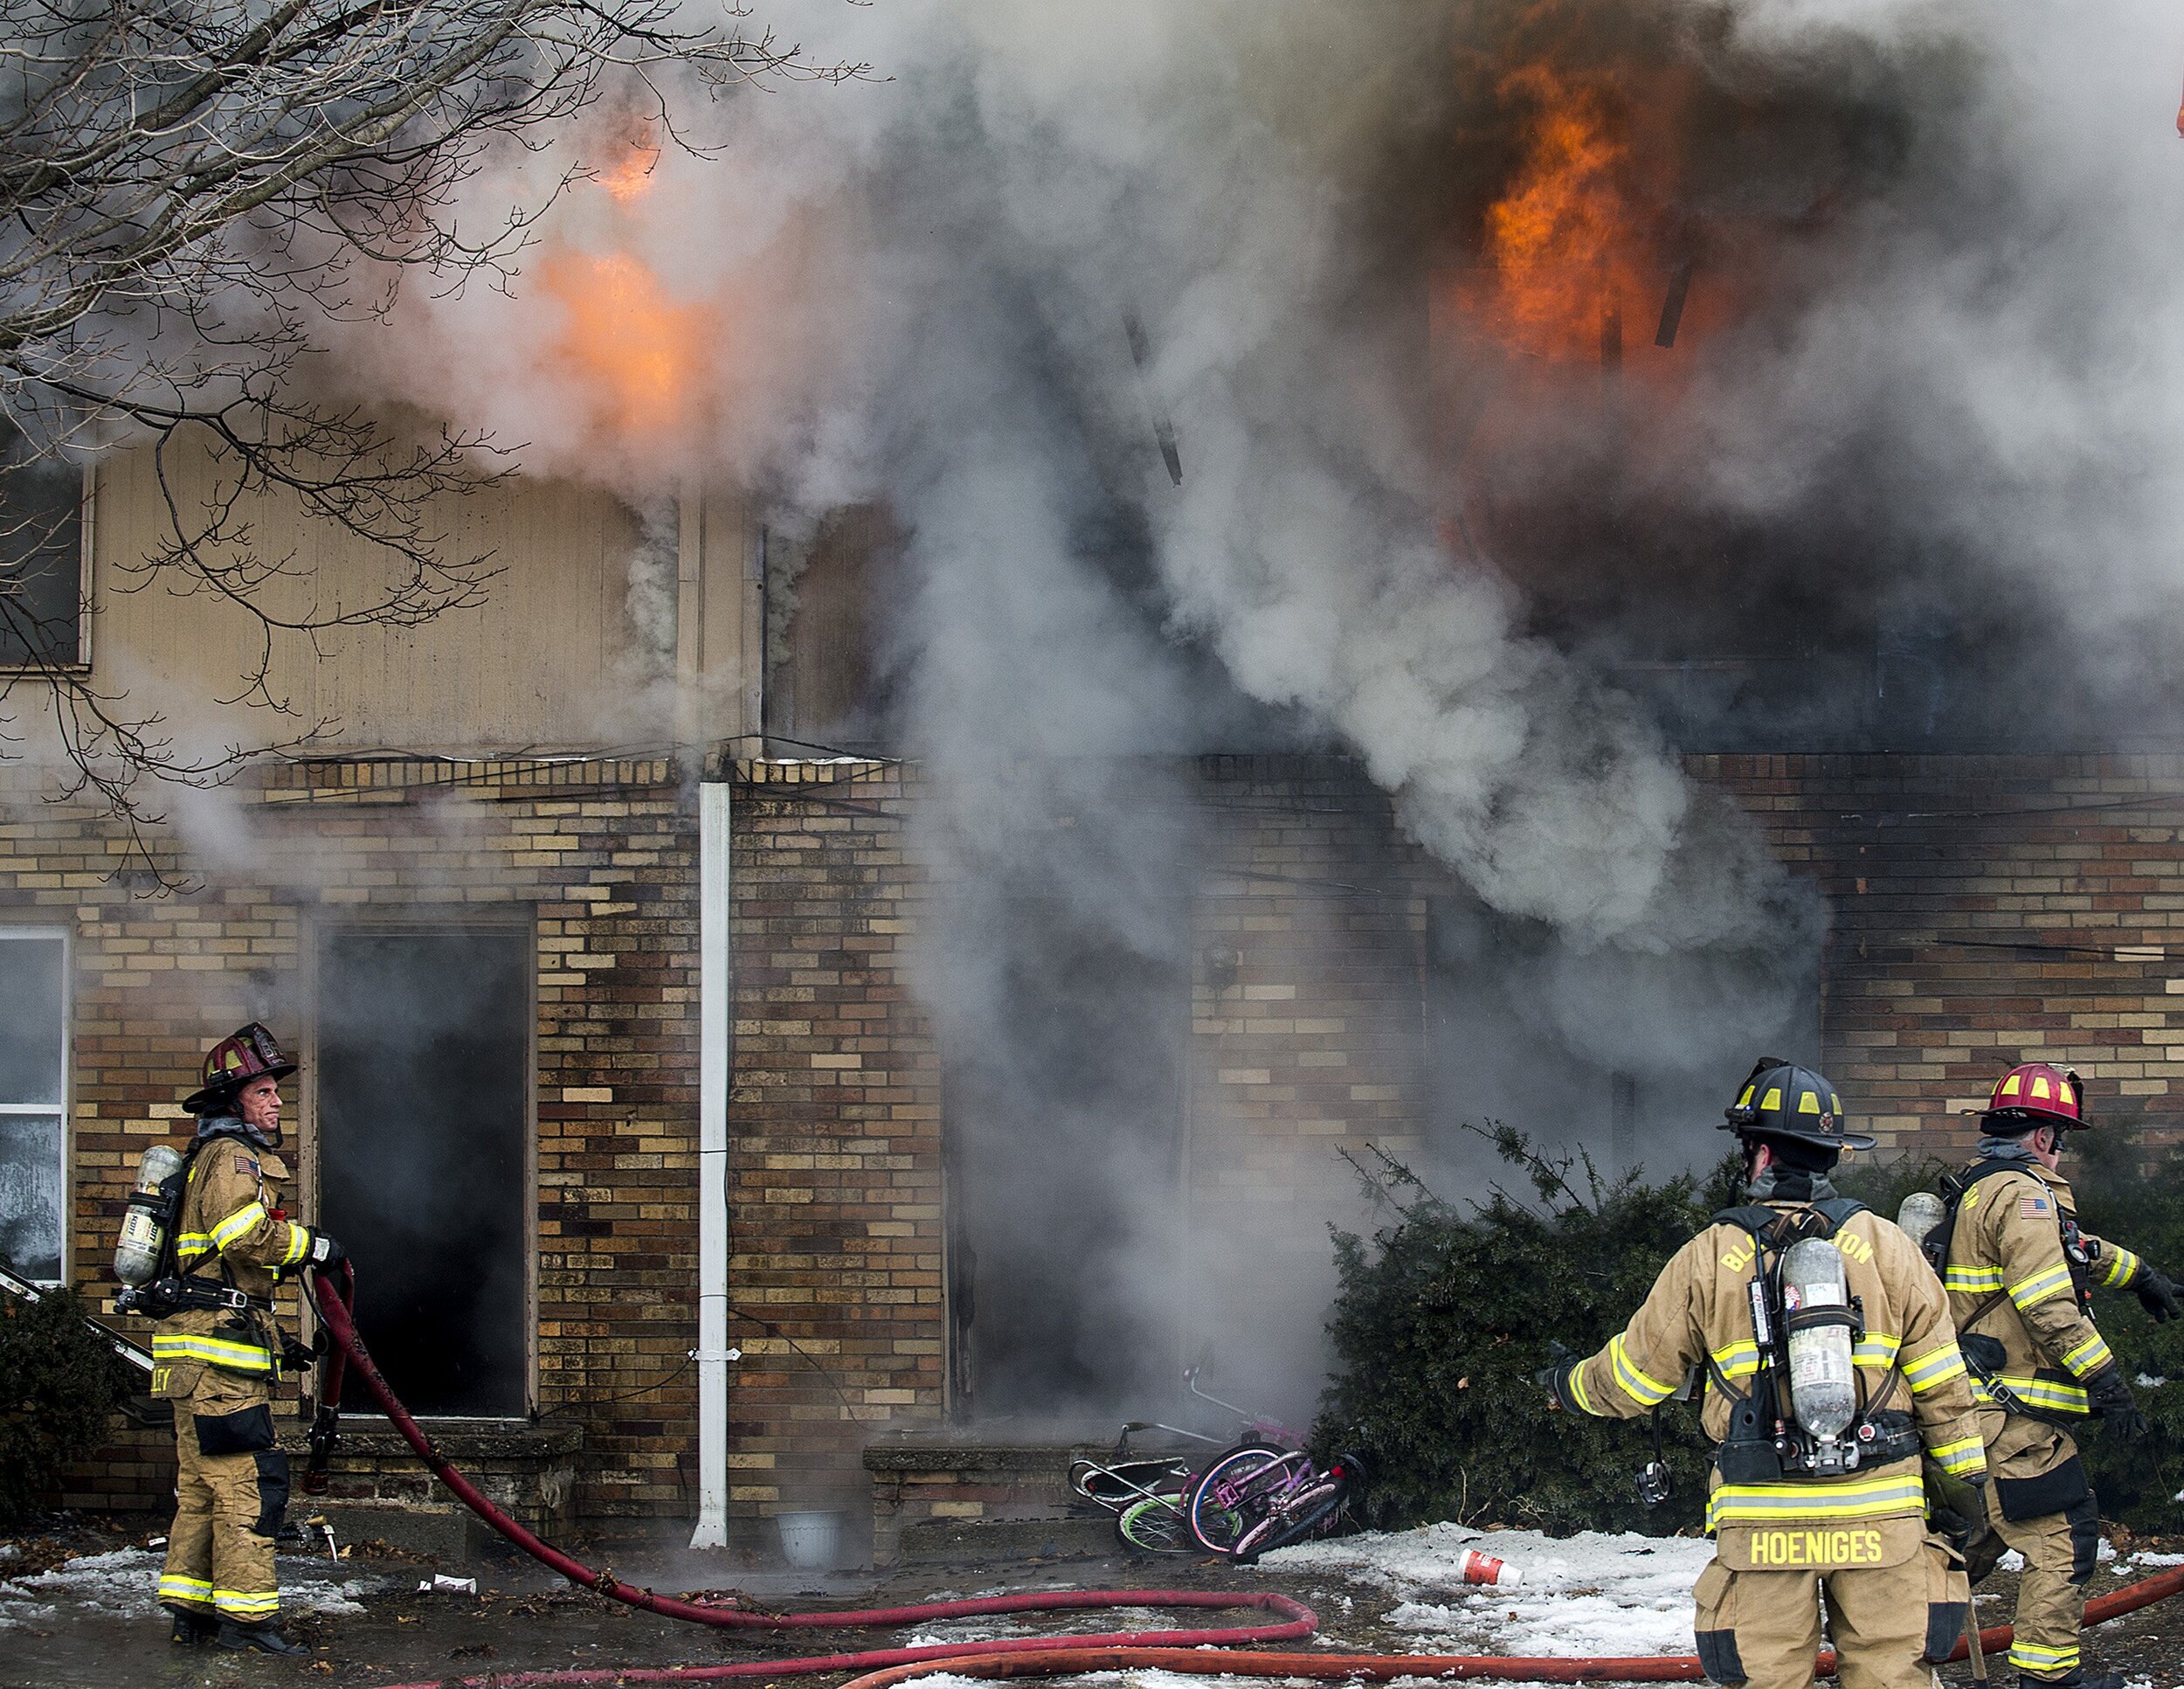  Firefighters plan their attack on a structure fire Saturday, Feb. 10, 2018, at a two-story, 12-unit apartment complex on Gettysburg Drive in Bloomington, Illinois. The fire was reported at 3:20 p.m., and one firefighter was injured during response. 